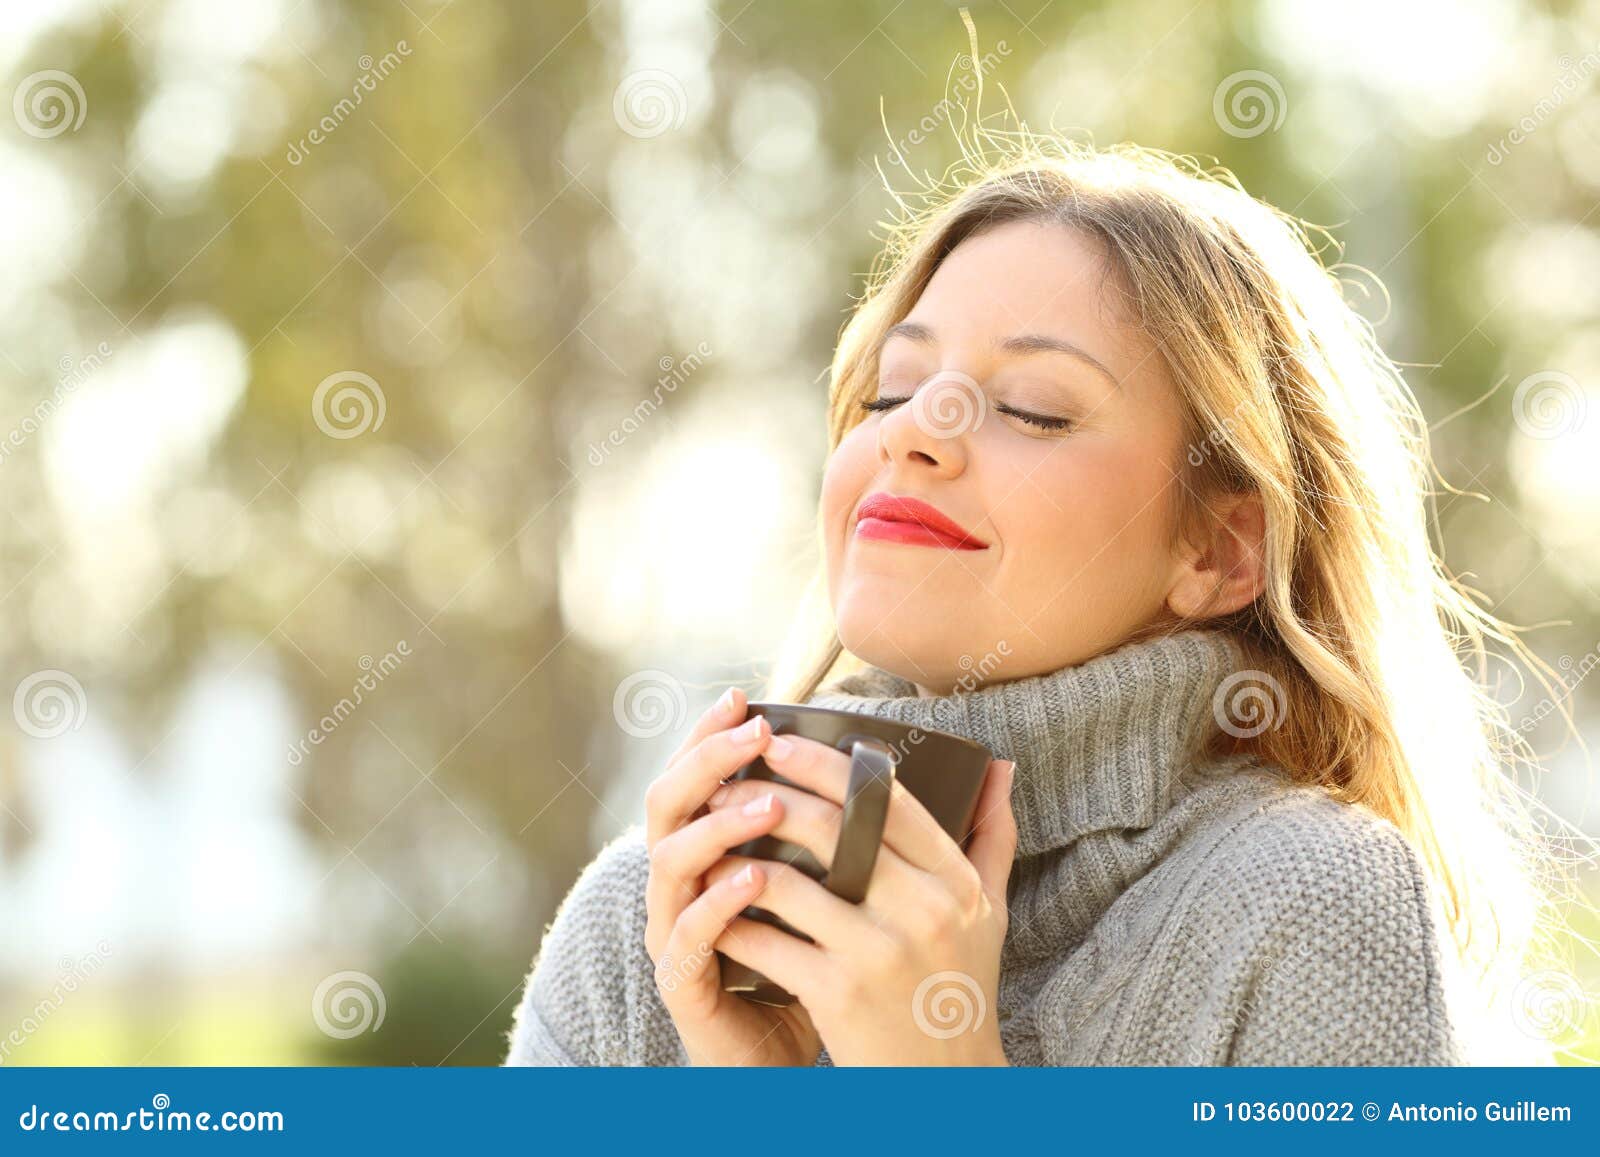 relaxed girl breathing outdoors in winter